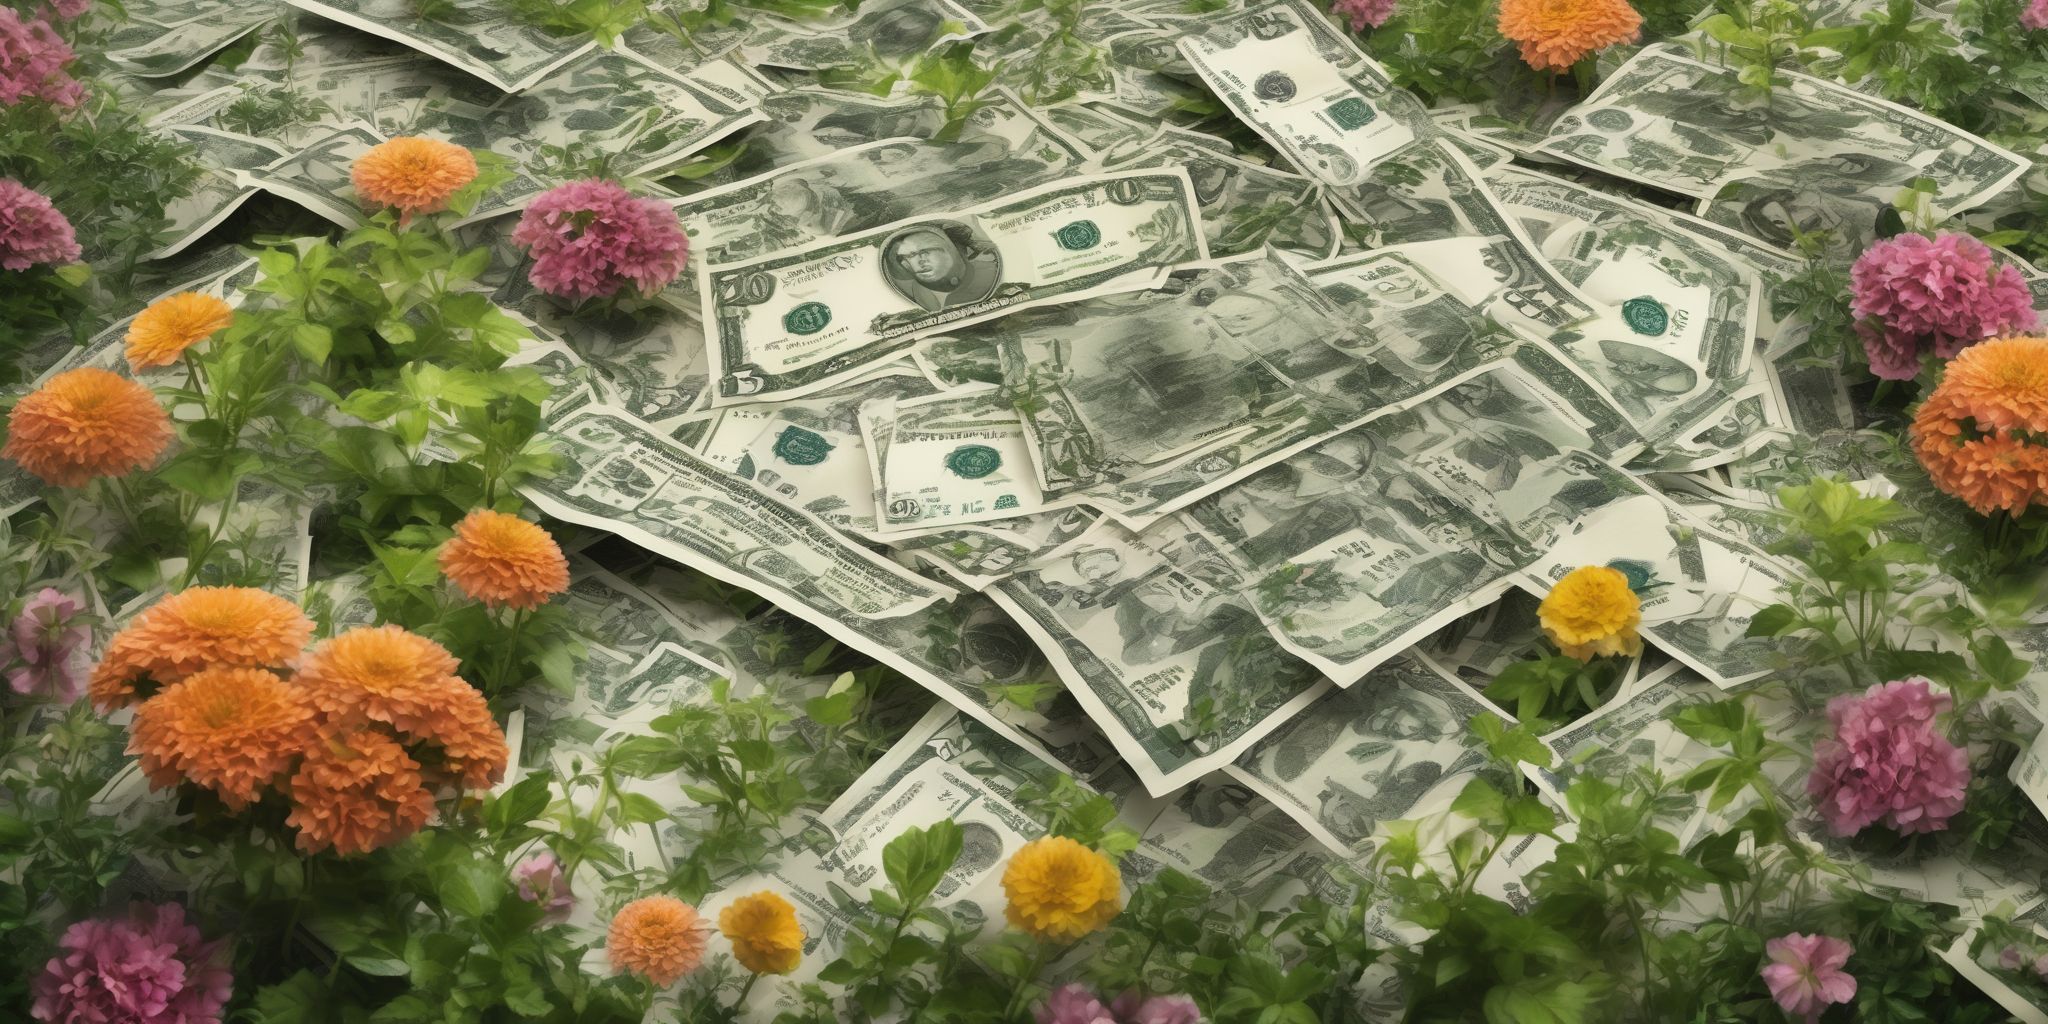 Banknote garden  in realistic, photographic style